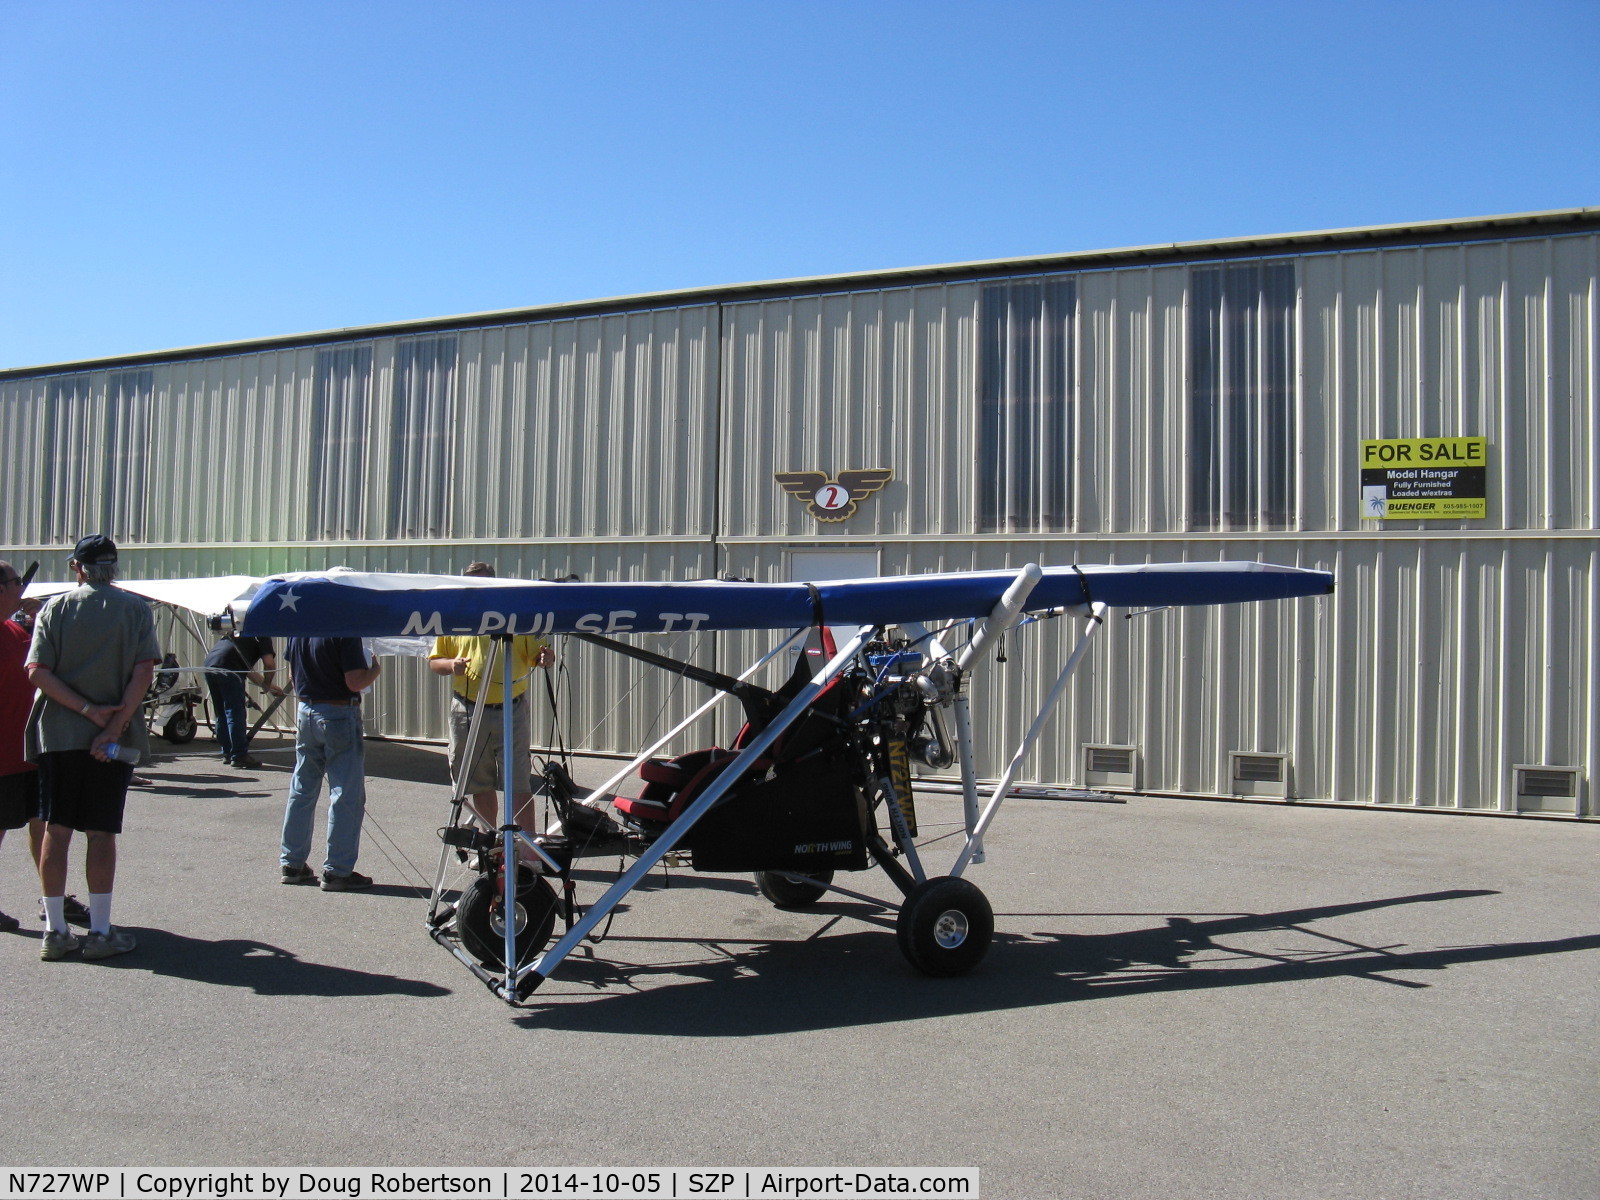 N727WP, 2004 North Wing  C/N 001, 2004 Wallace North Wing Design weight-shift trike, Rotax 582